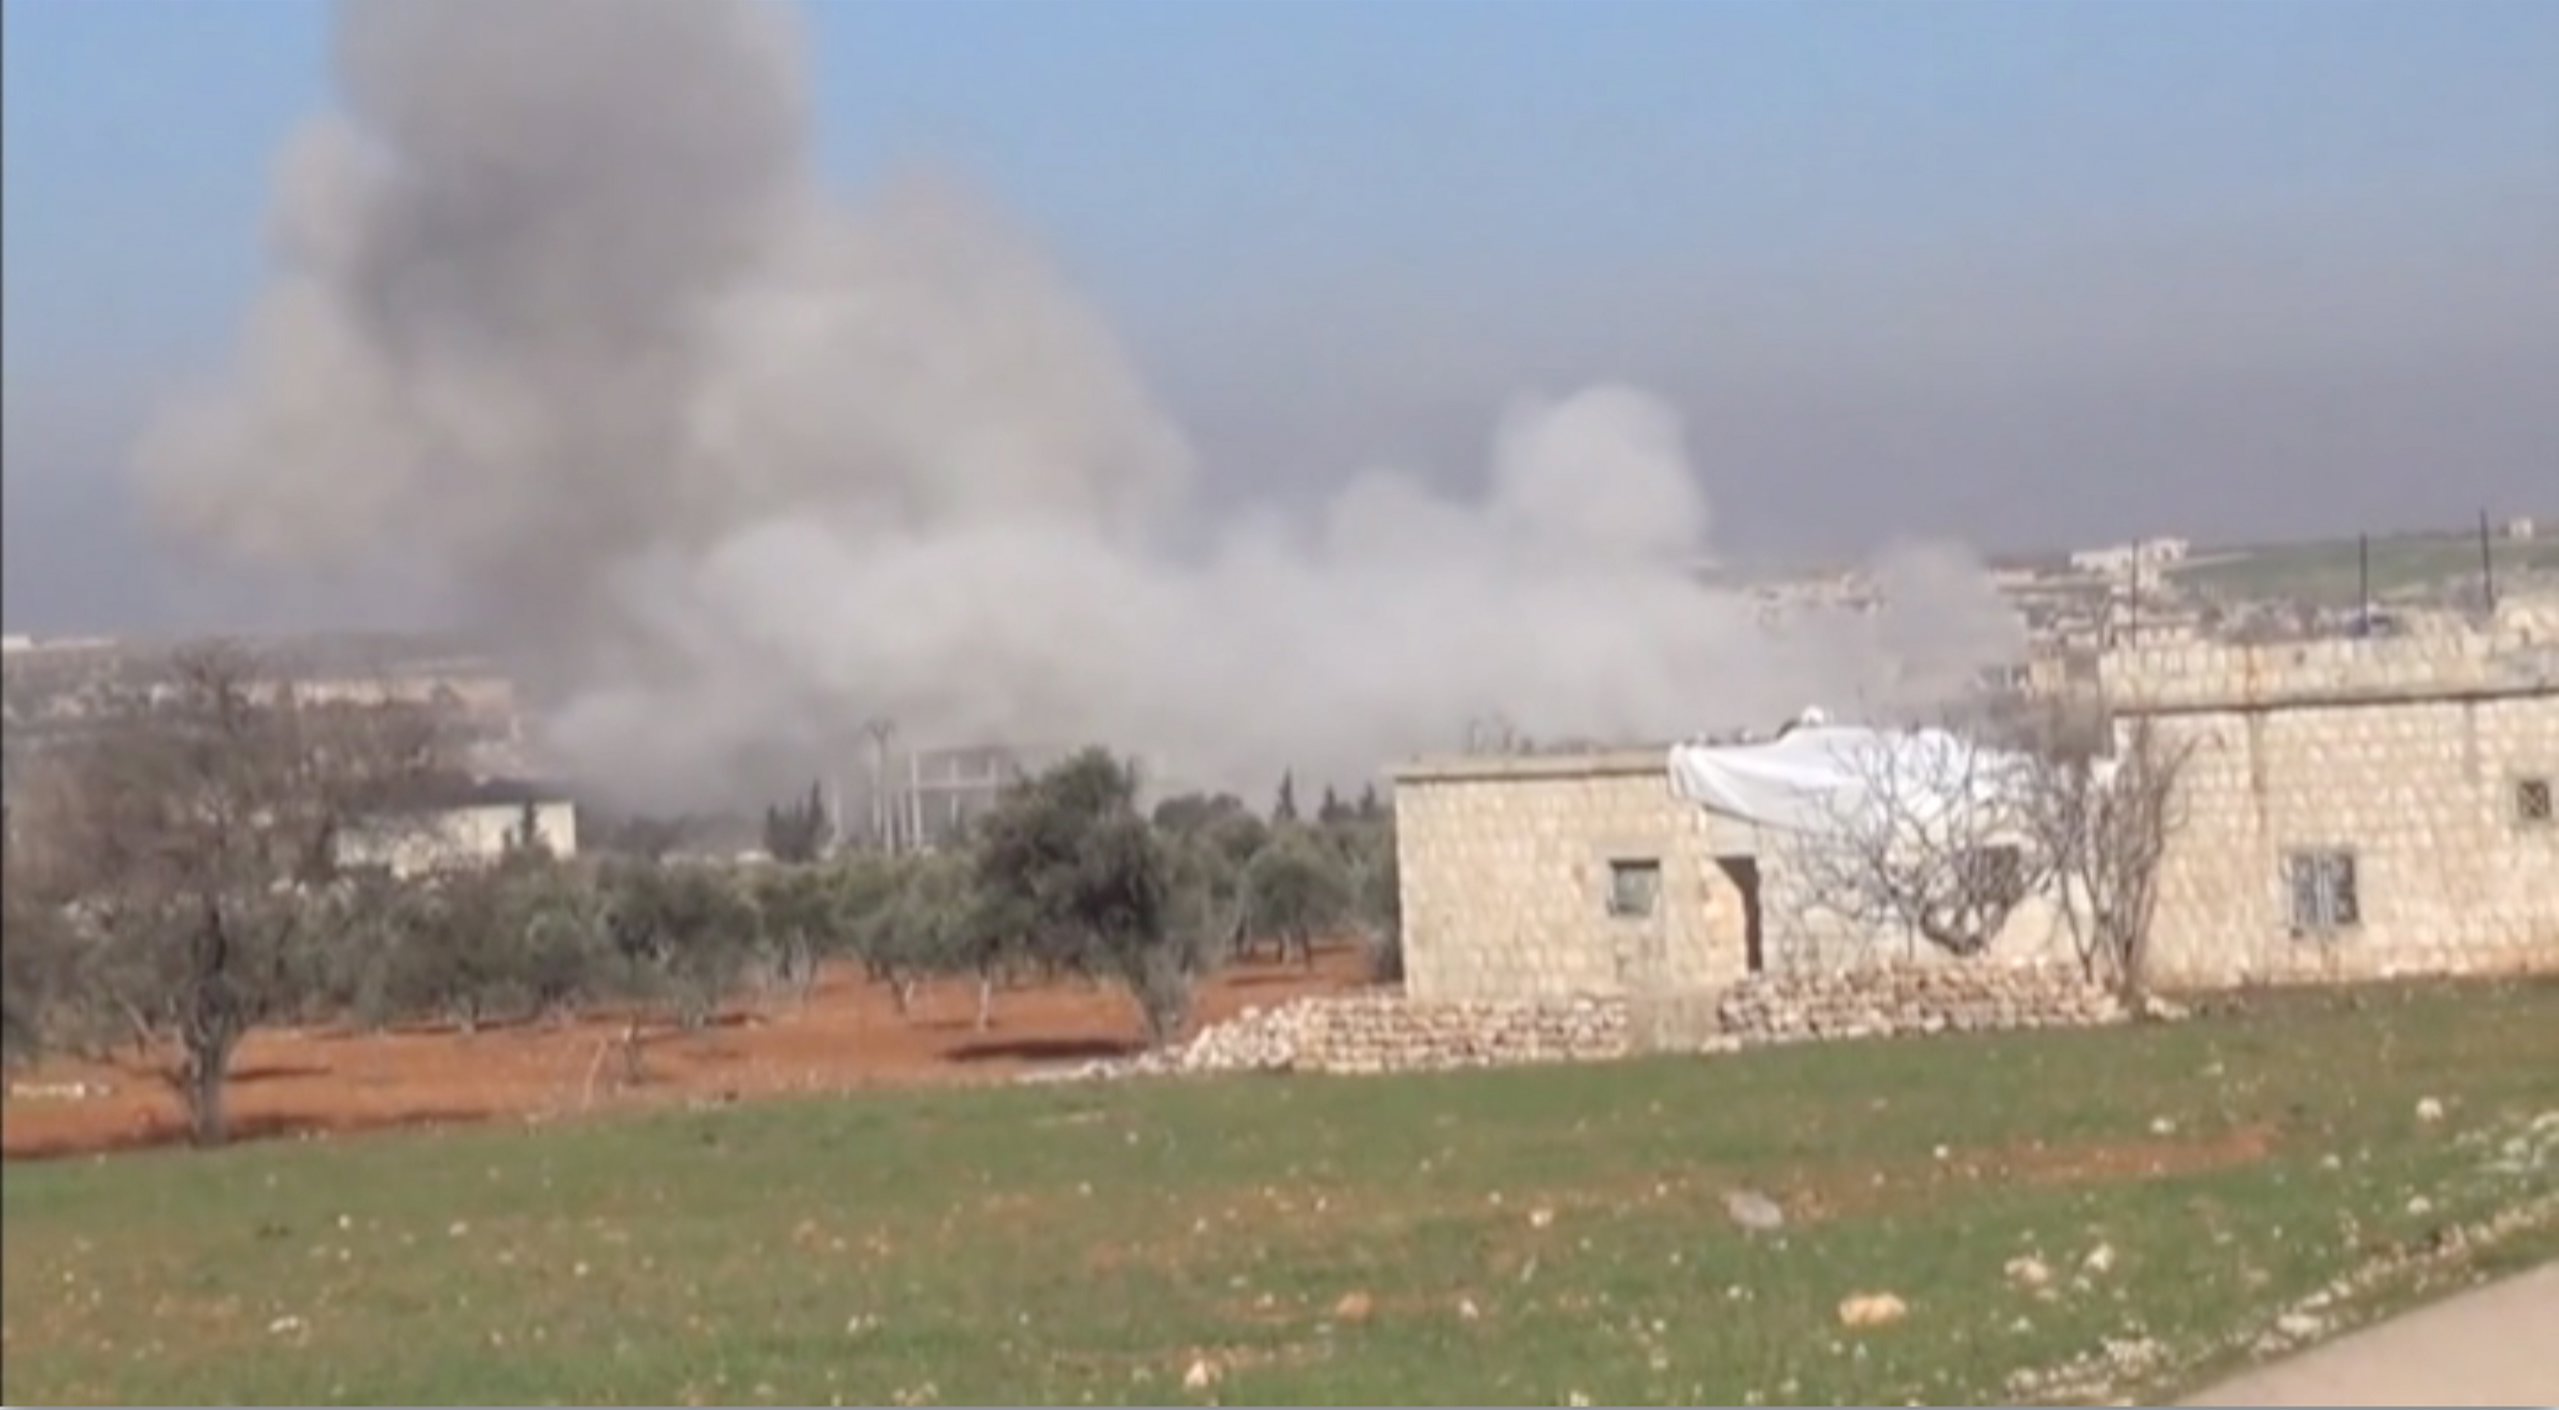 Still image taken from video shows smoke rising from a location said to be a Medecins Sans Frontieres (MSF) supported hospital in Marat al Numan, Idlib, Syria